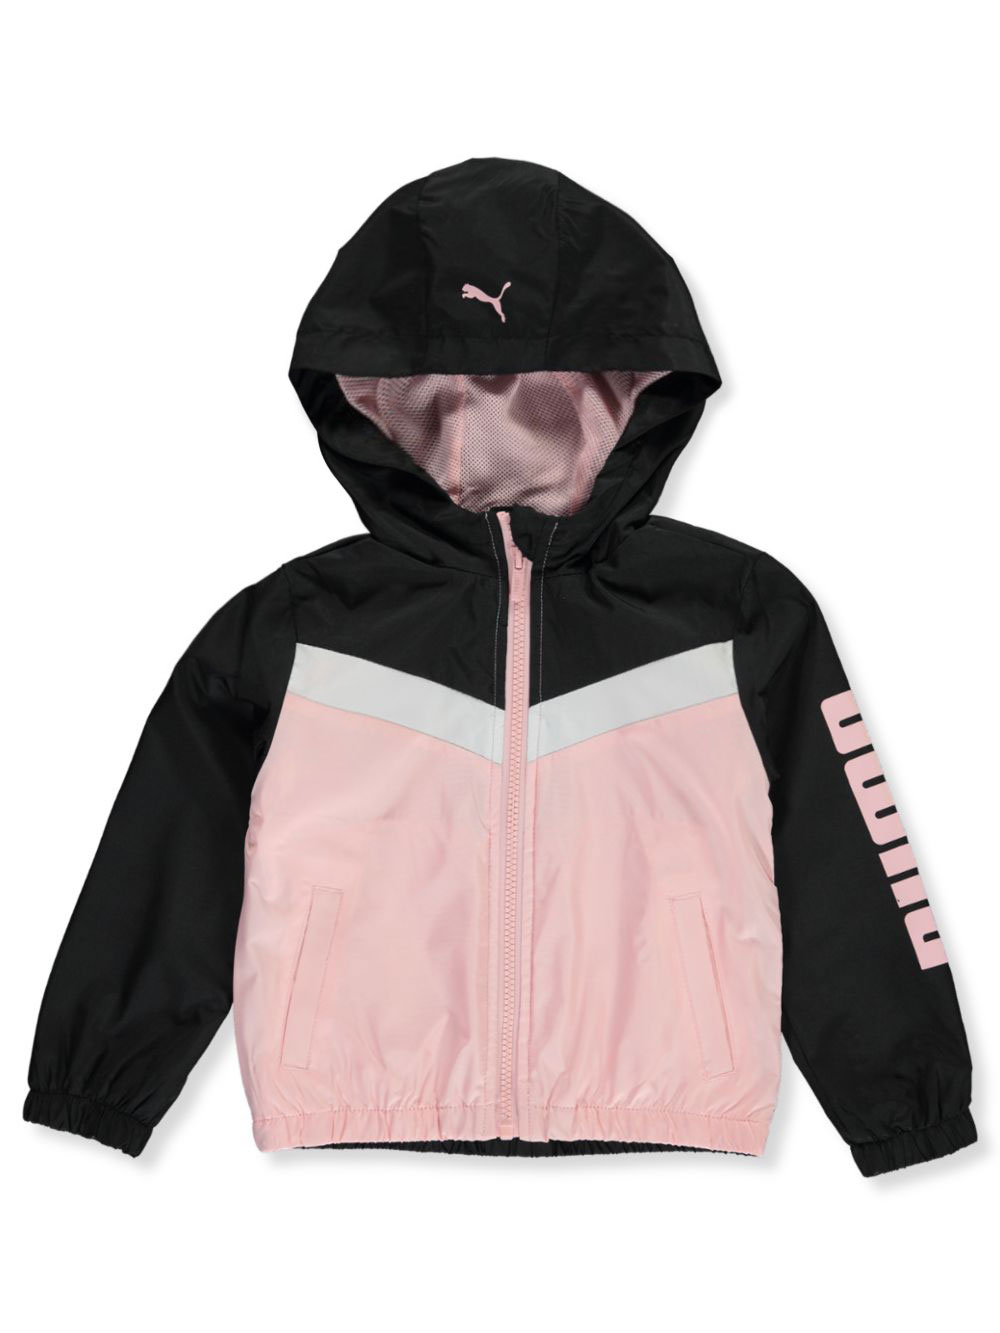 Puma Jackets from Cookie's Kids